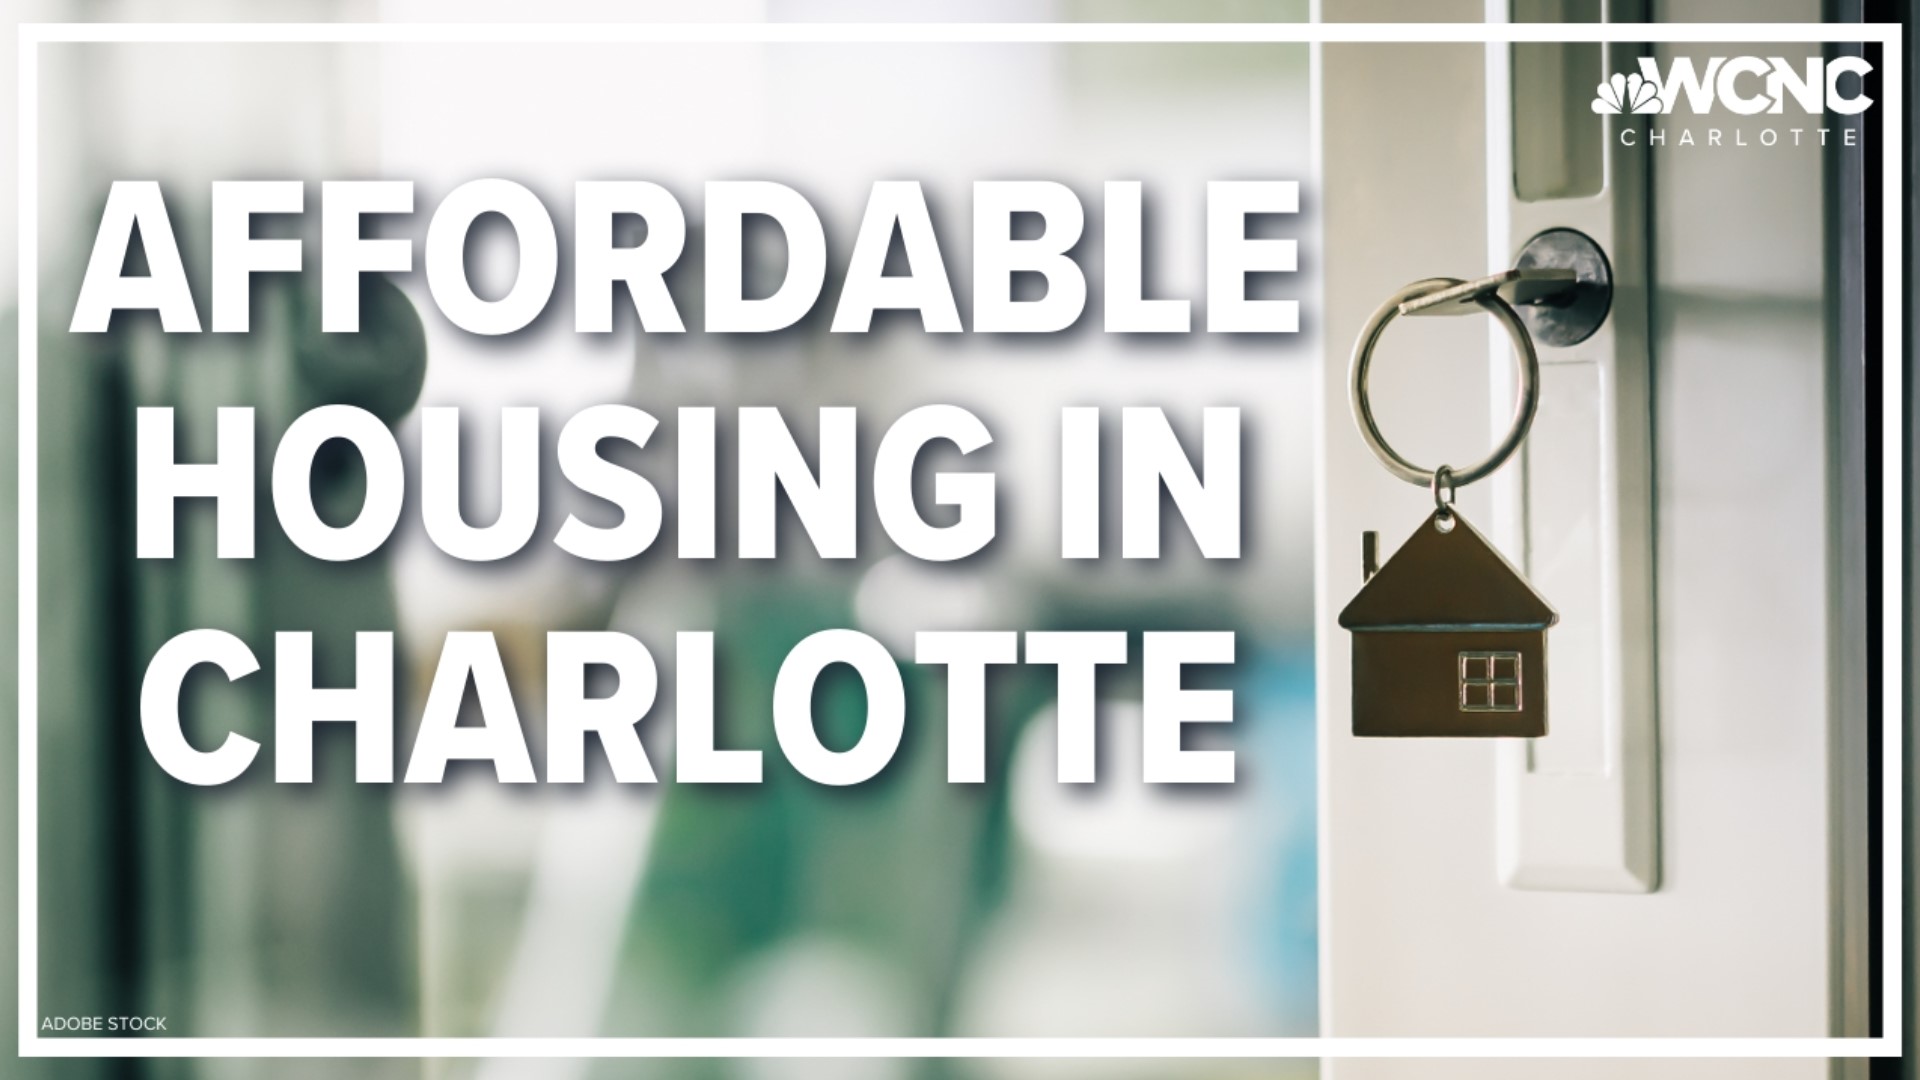 Monday night, Charlotte City Council discussed several new projects that would bring hundreds of affordable apartments and some homes to the Queen City.